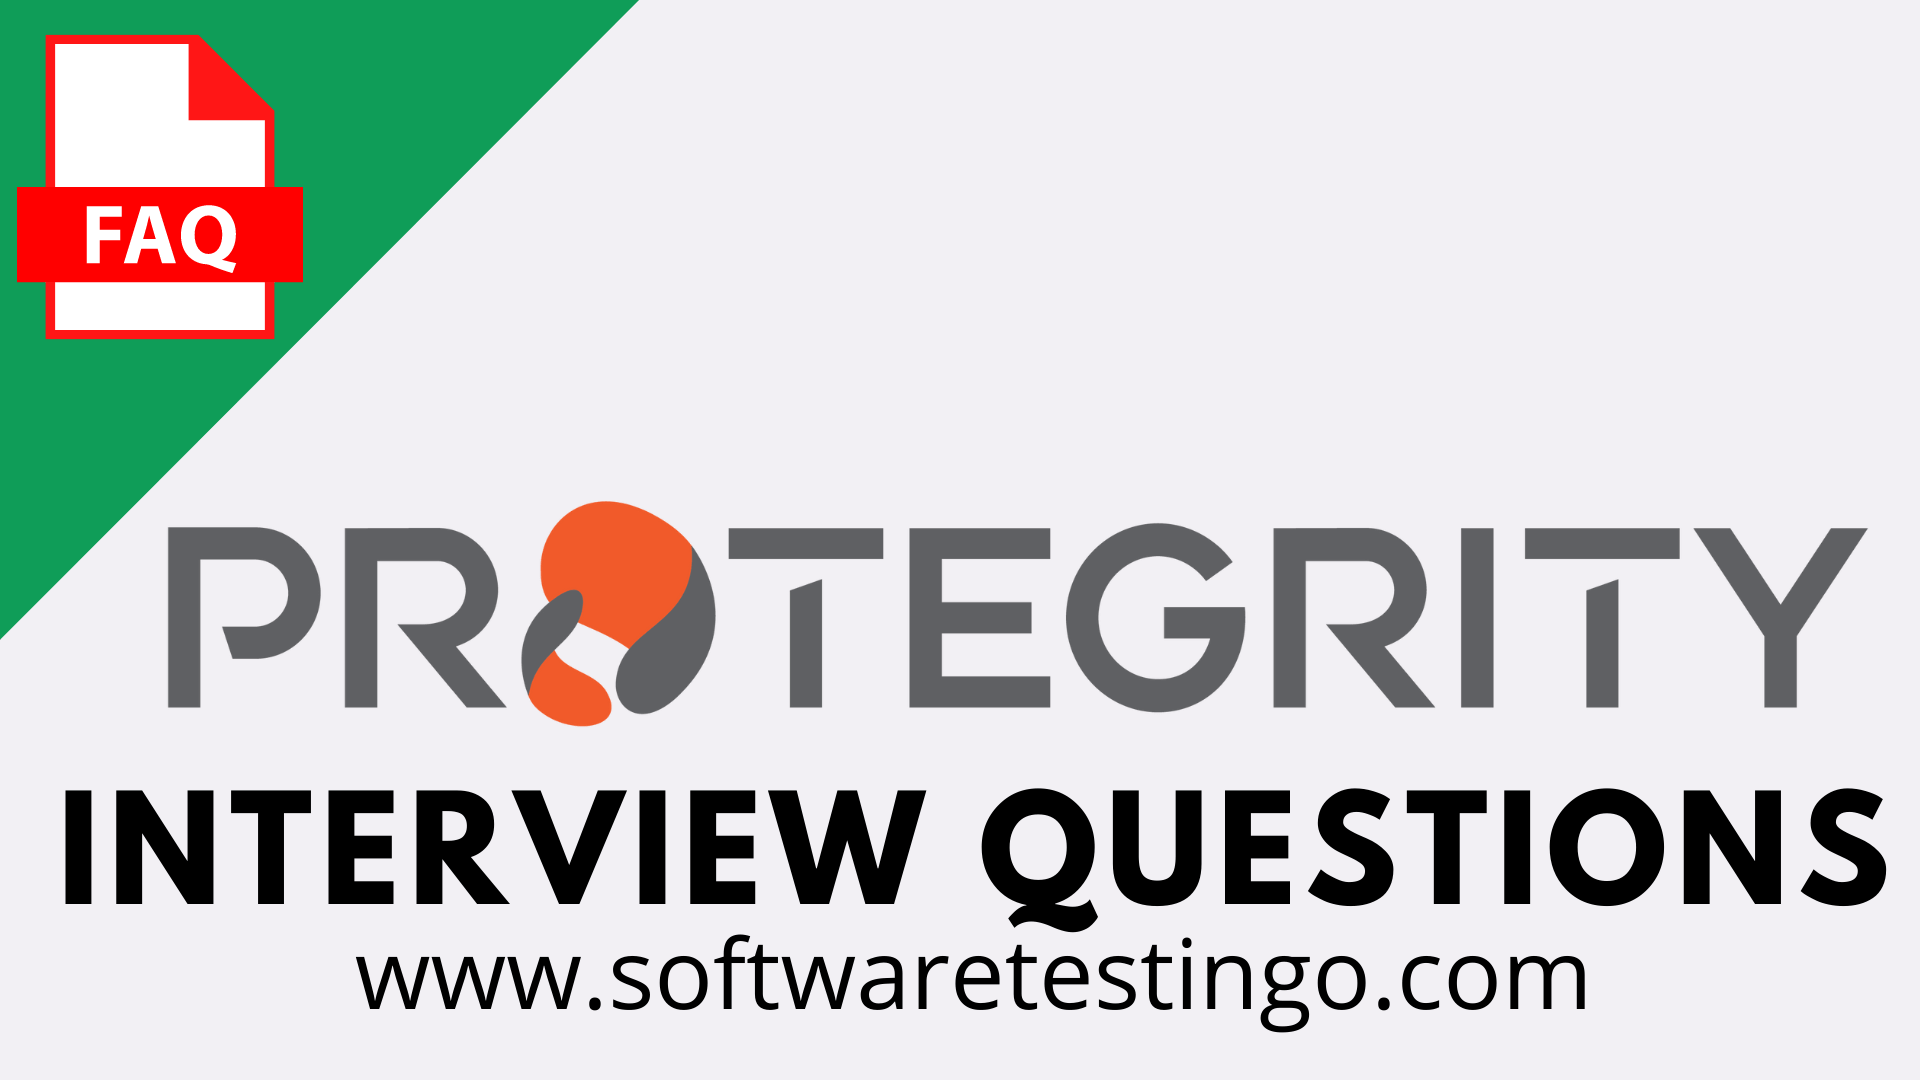 Protegrity Interview Questions